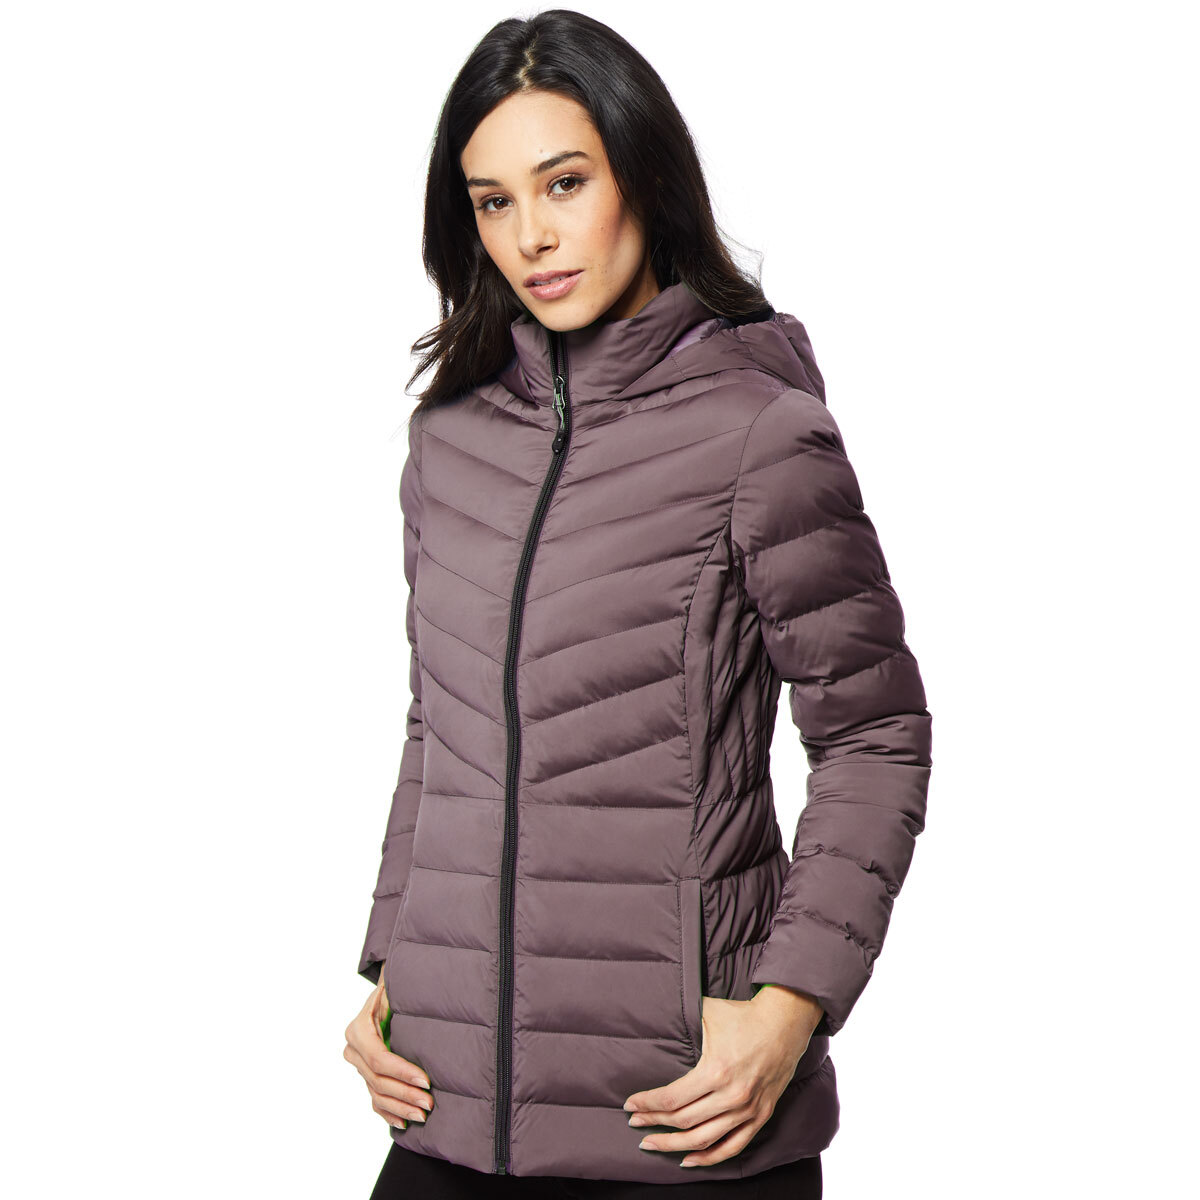 modbydeligt Matematisk Bevise 32 Degrees Women's Quilted Jacket with Hood in 3 Colours ...